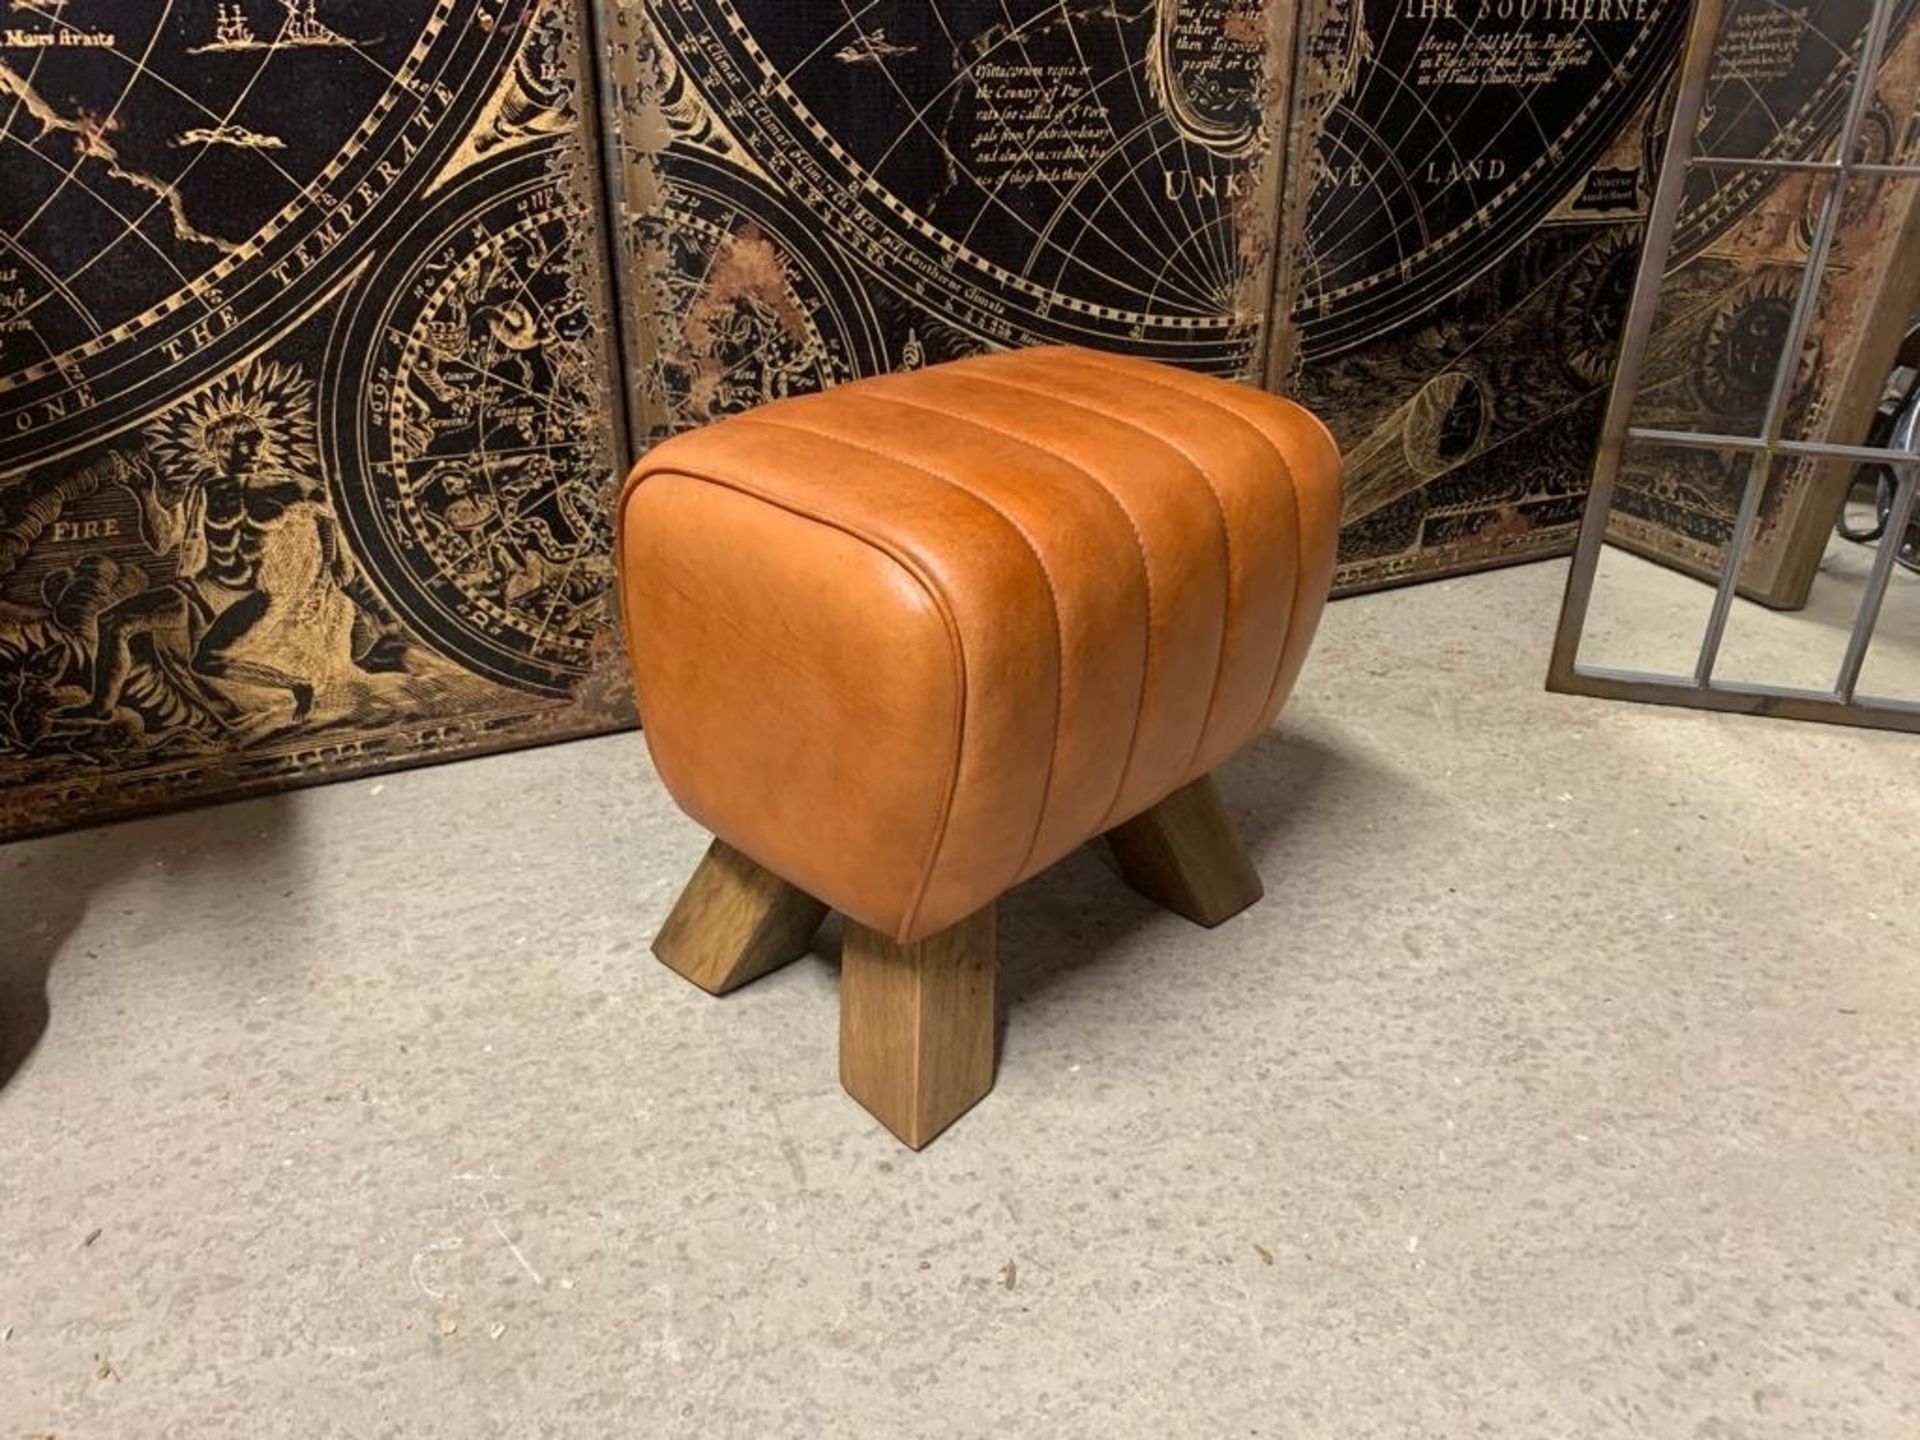 BOXED NEW TAN LEATHER SMALL POMMEL HORSE